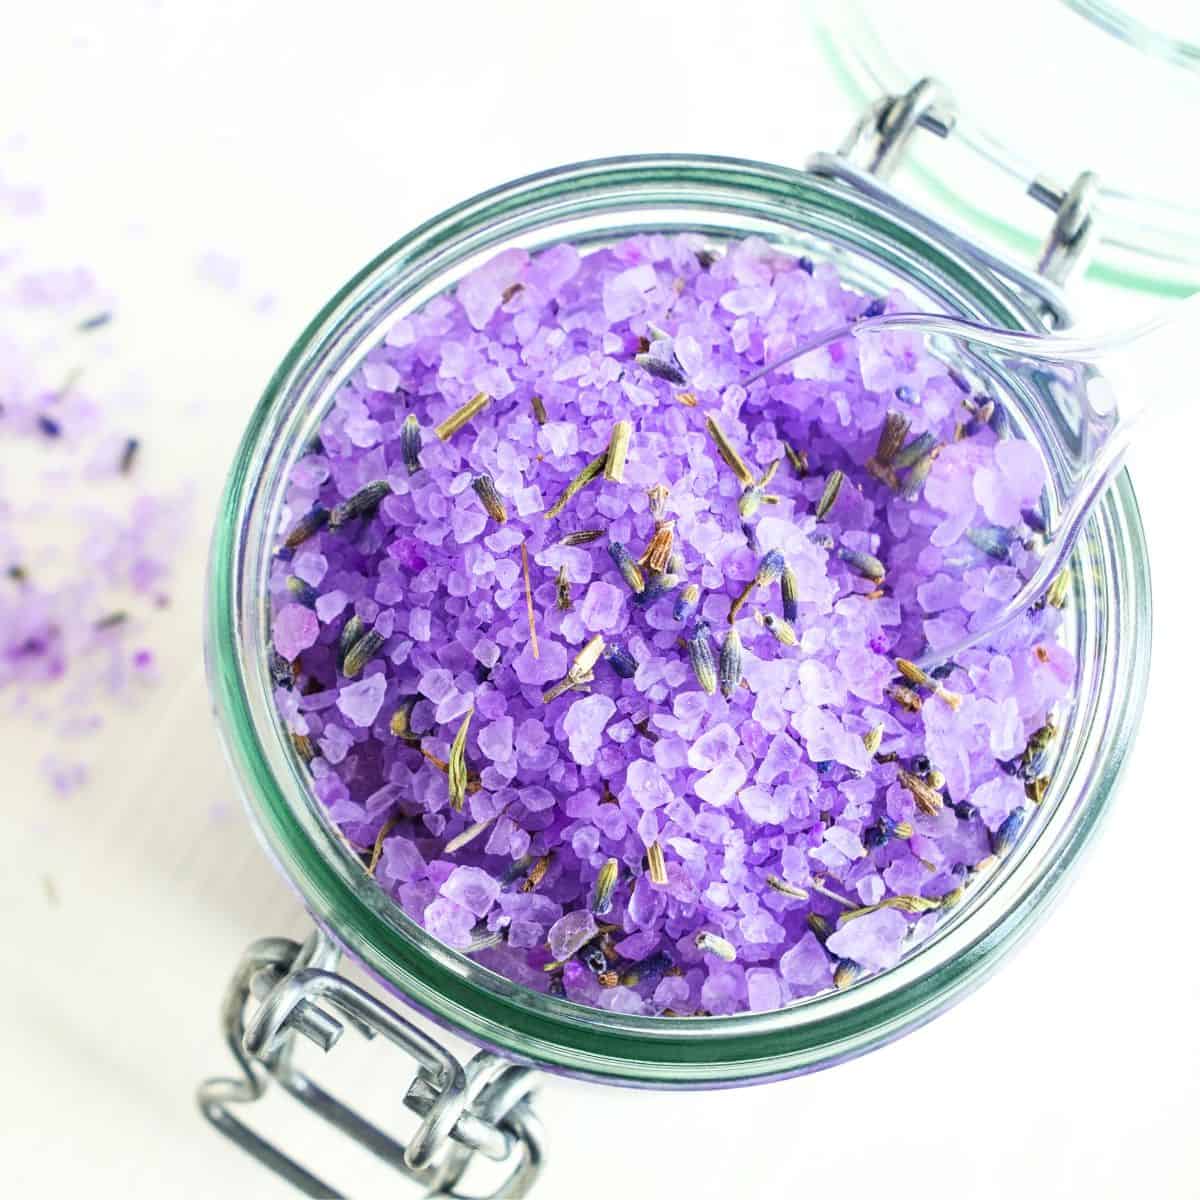 A jar full of lavender bath salts with a scoop in it.